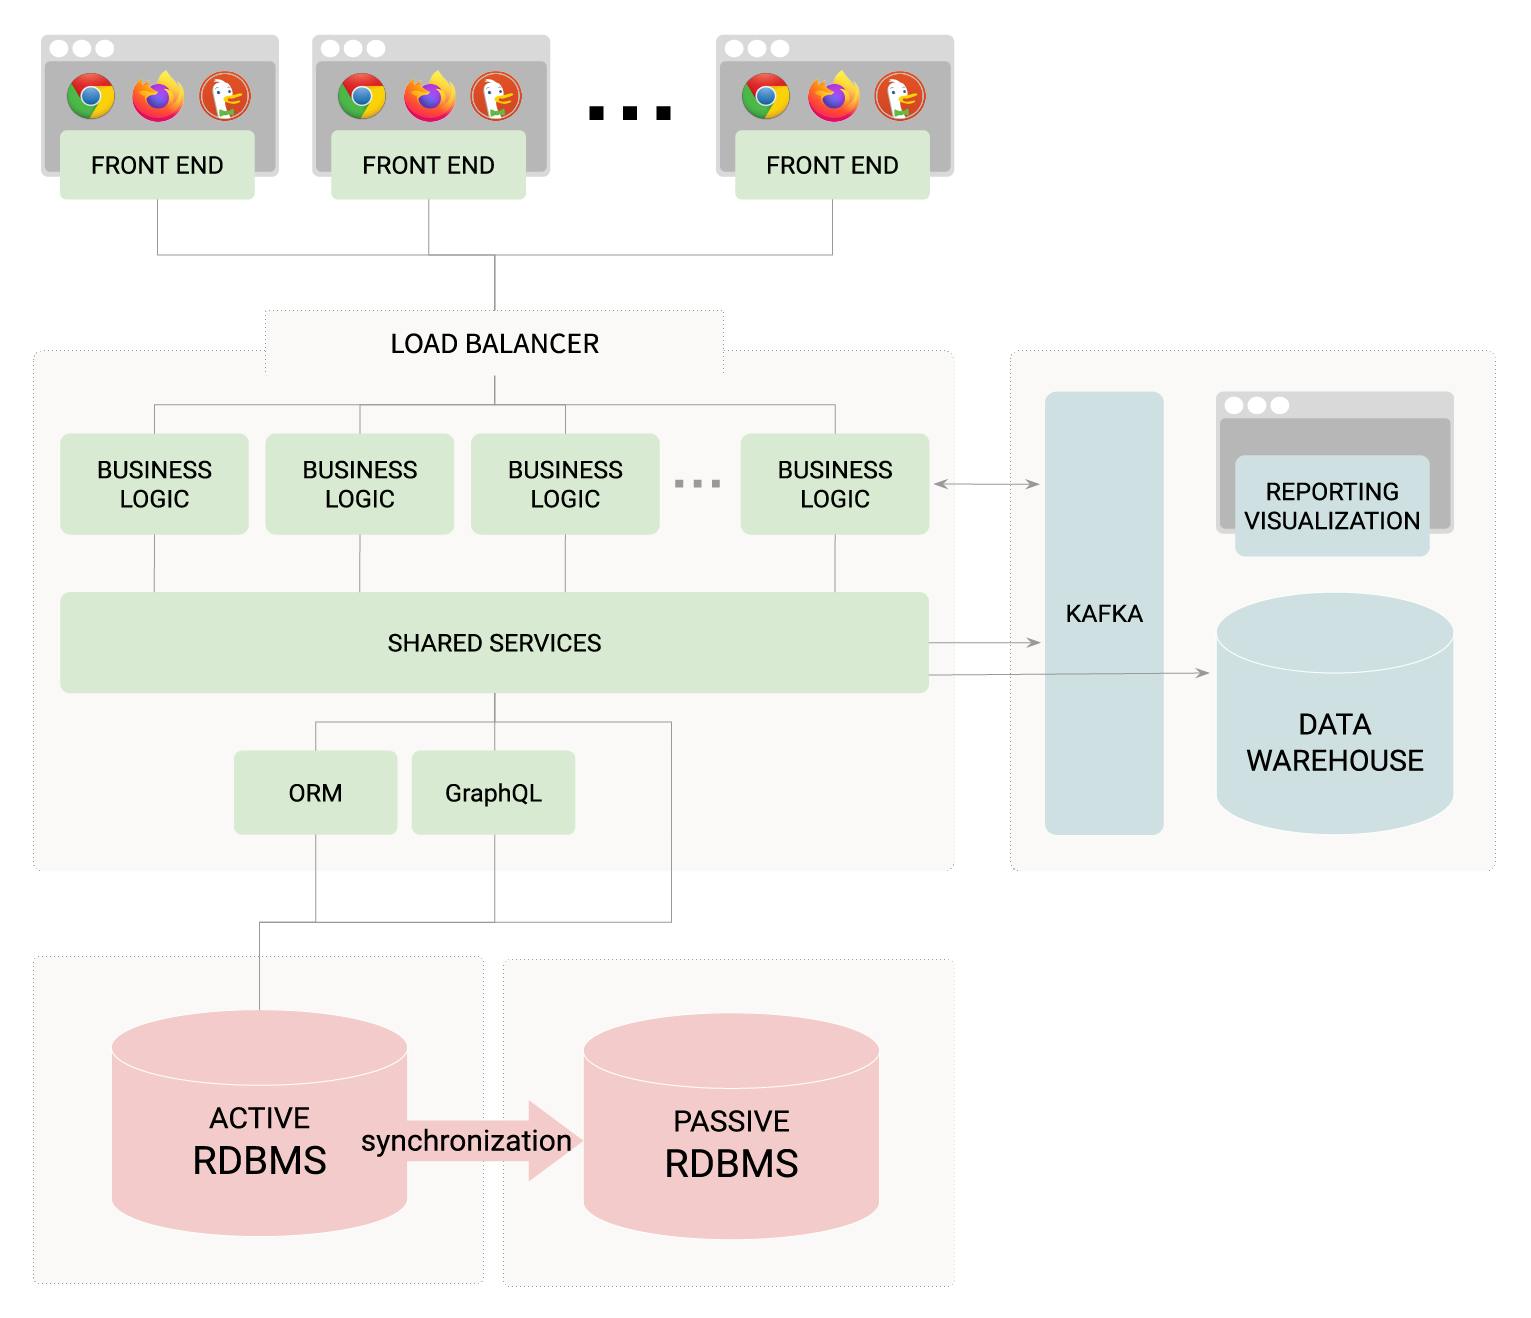 startup reference architecture - single region